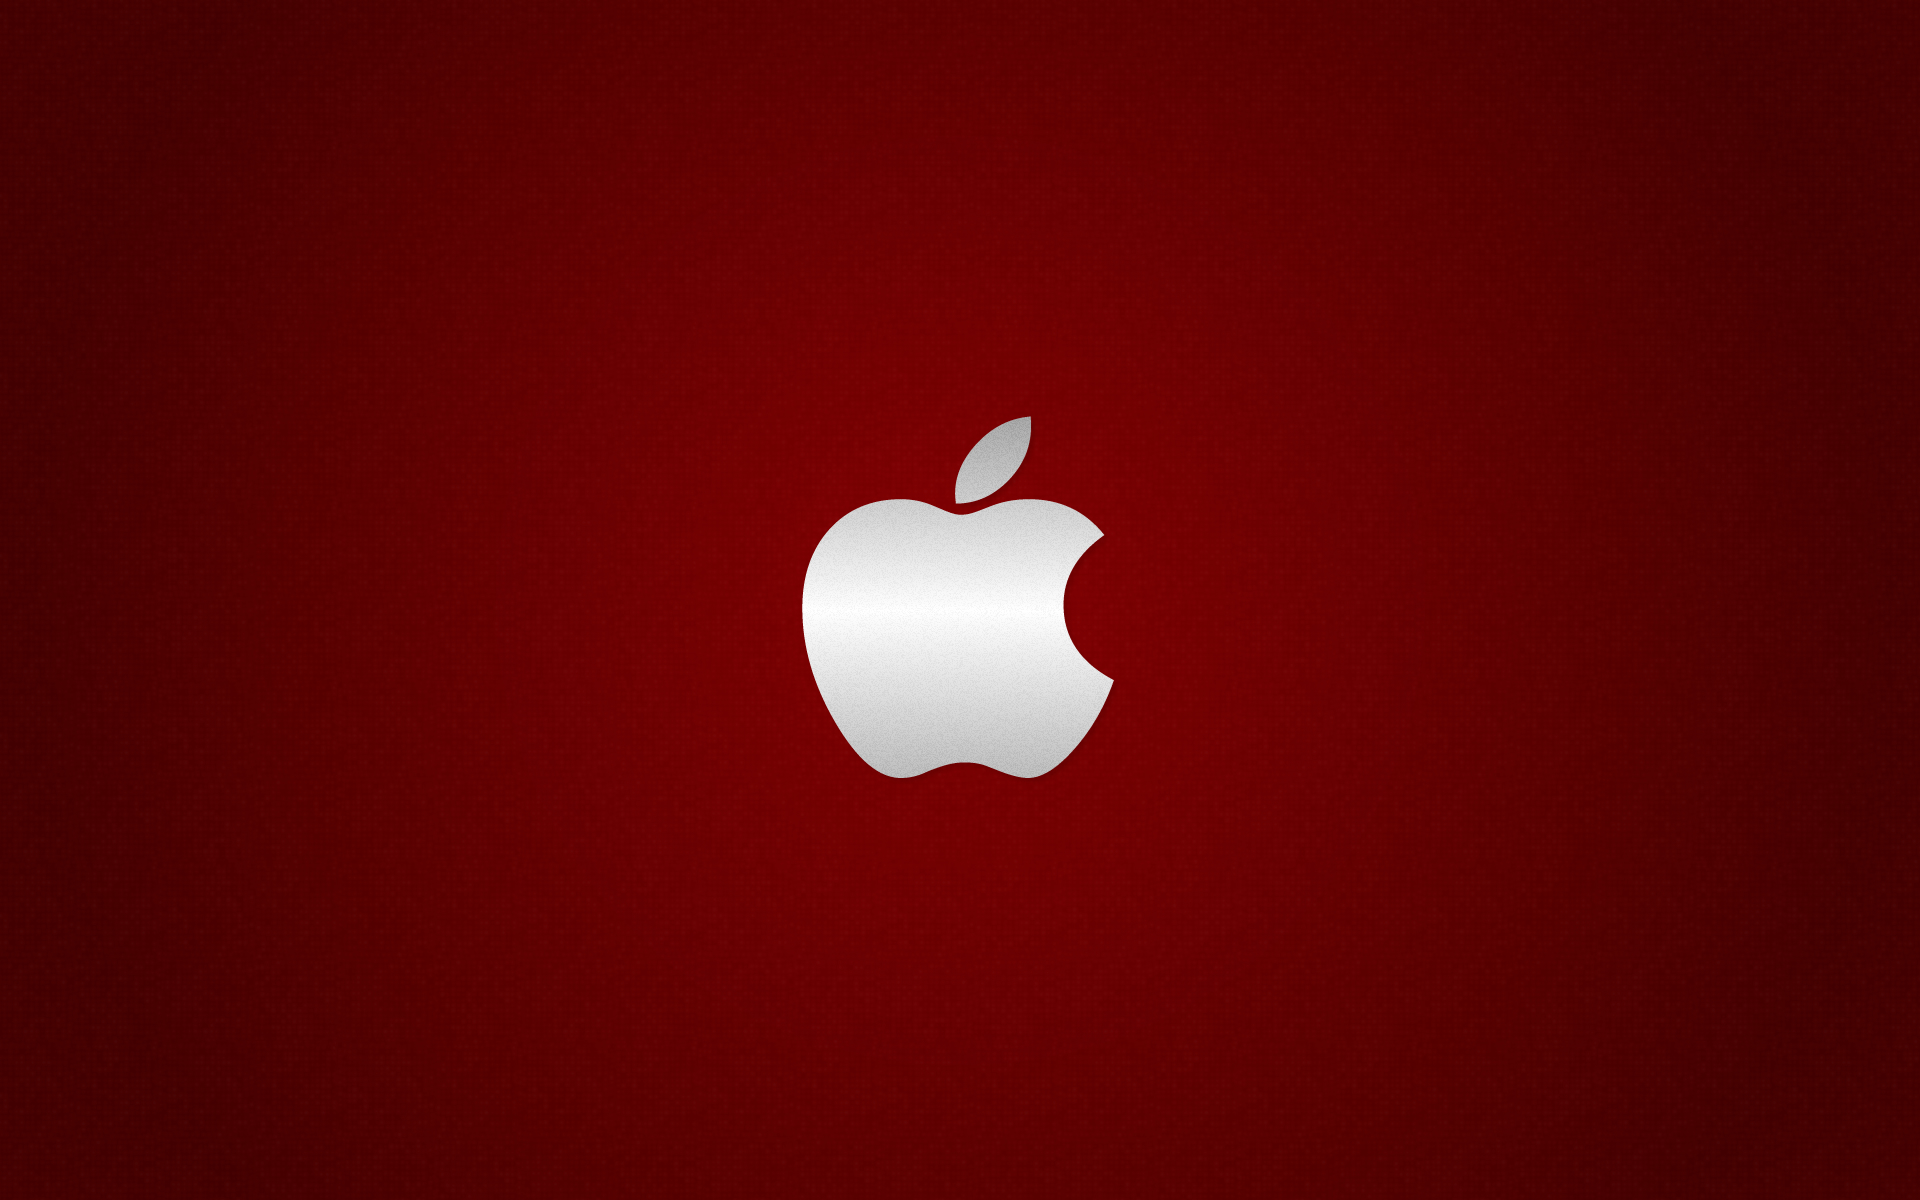 Apple on the red carpet